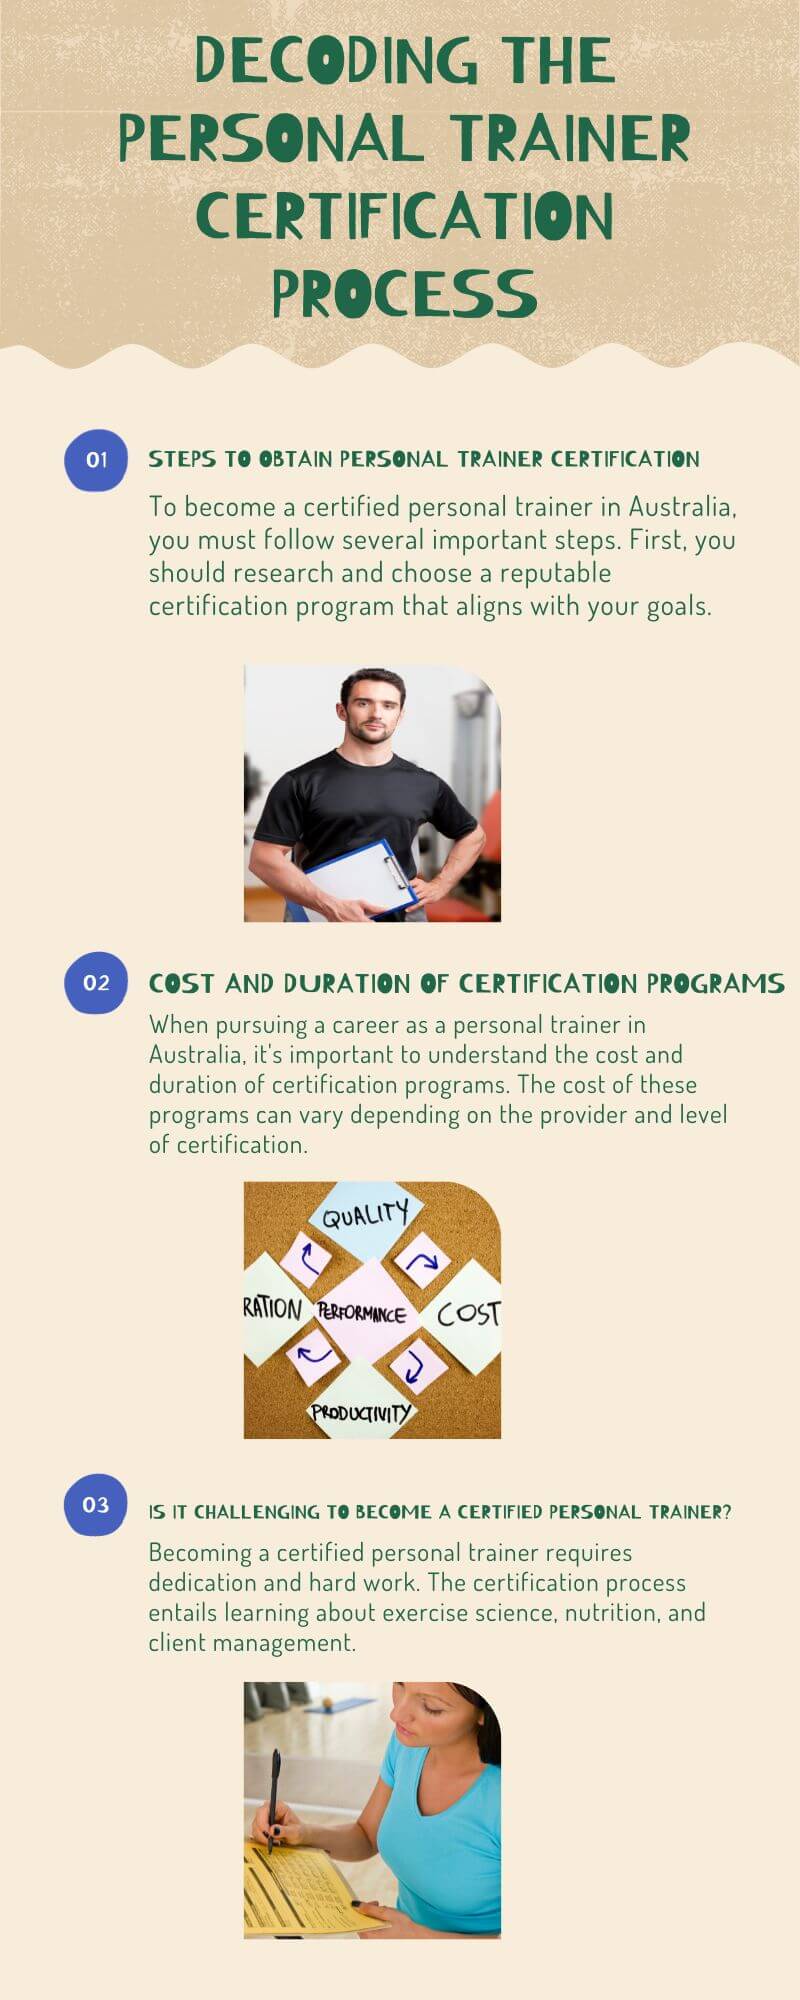 Decoding The Personal Trainer Certification Process